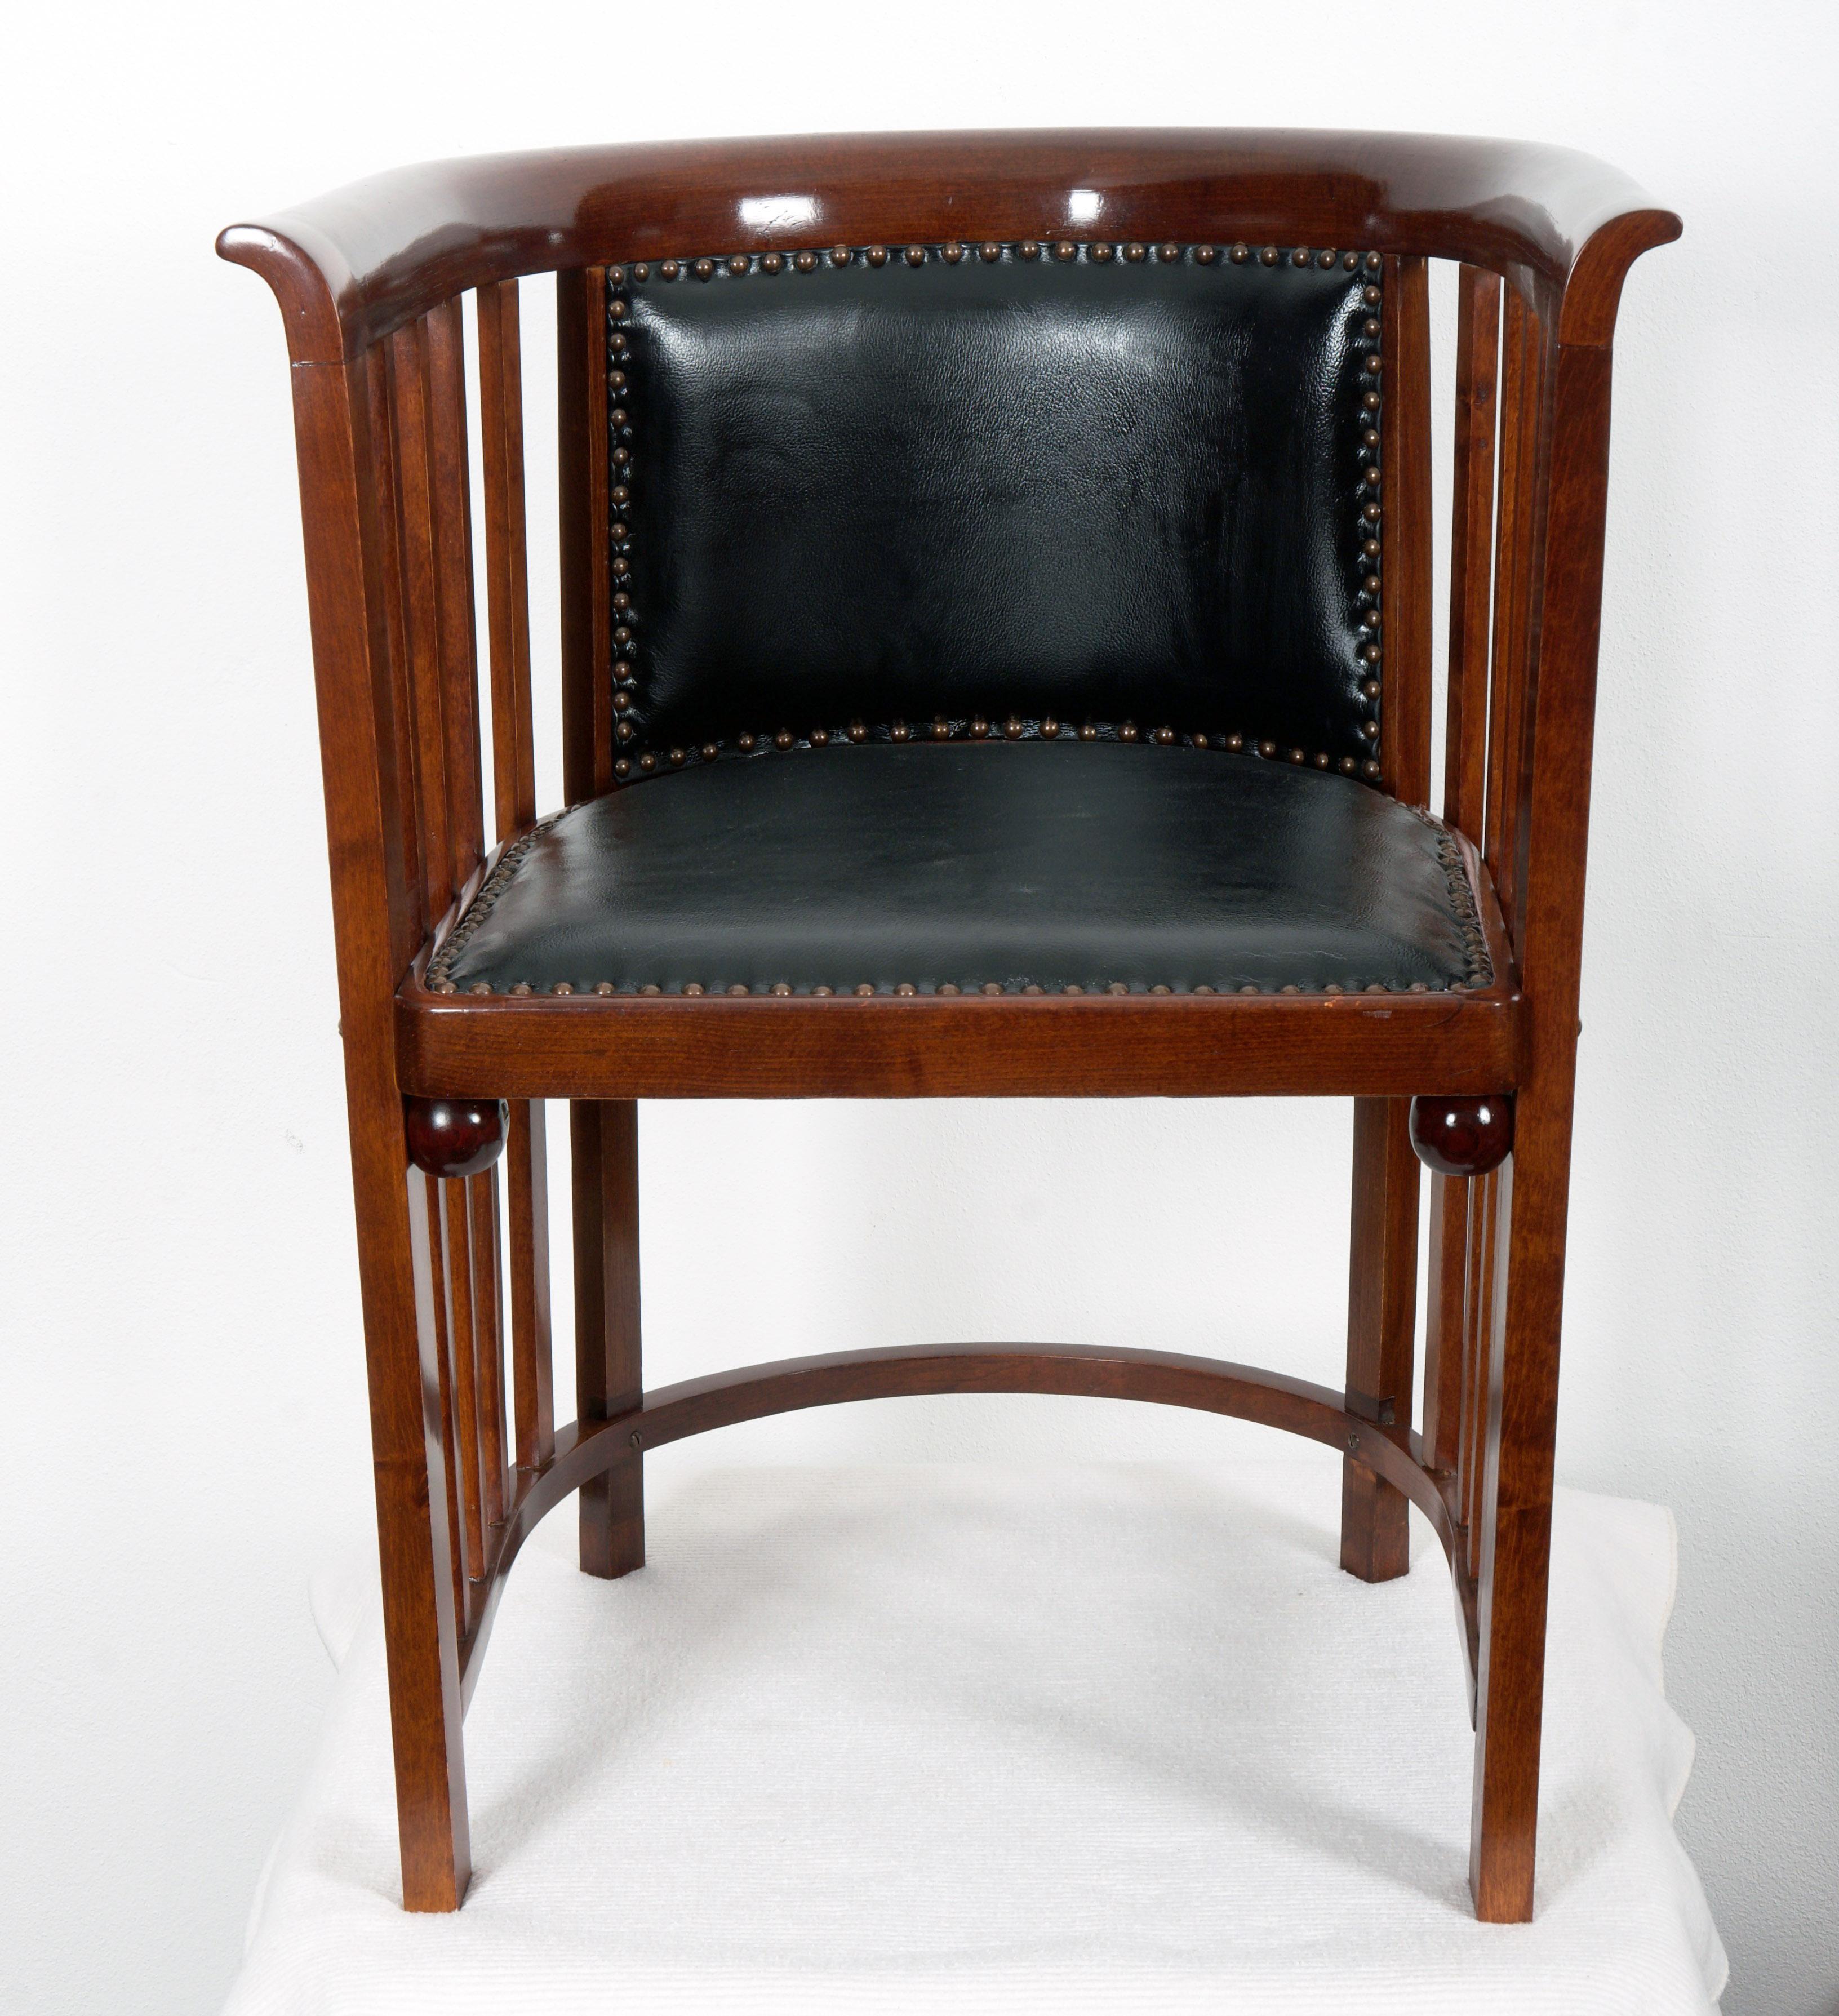 Beech bentwood frame, leather upholstery. Designed circa 1900-1910 by Josef Hoffmann for Cabaret Fledermaus in Vienna. Made by Thonet.
Delivery time about 4-6 weeks. Up to six available.